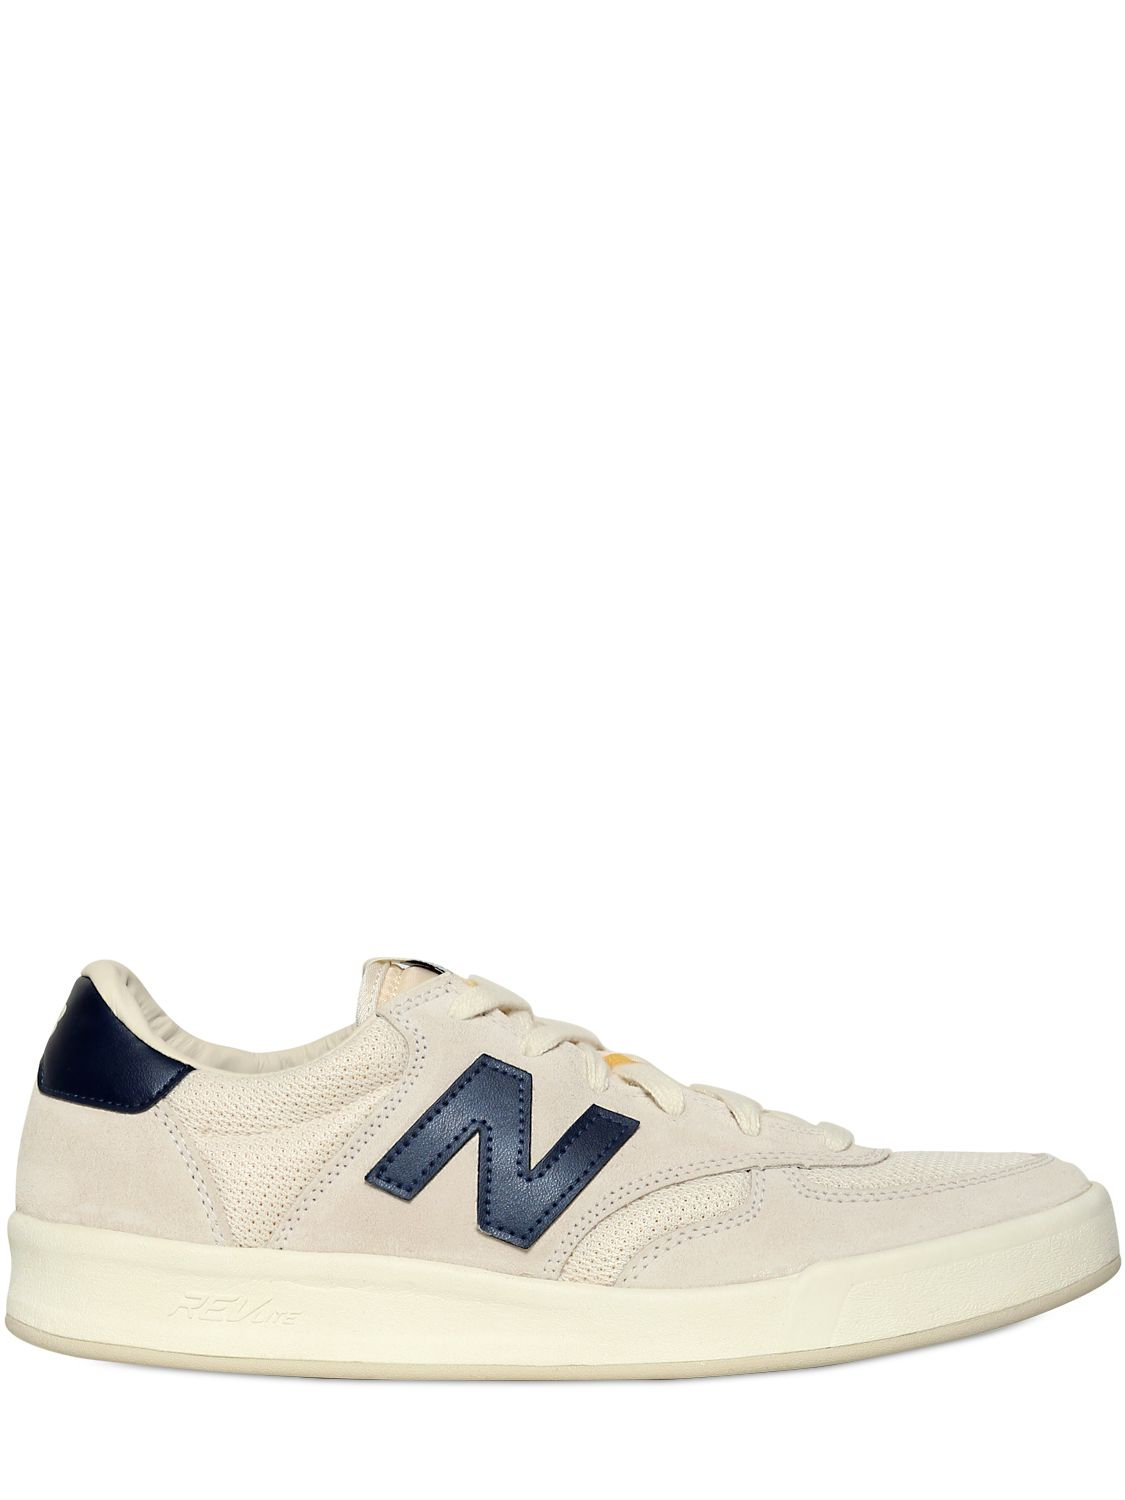 New Balance 300 Suede & Mesh Tennis Sneakers in White/Navy (White) for Men  - Lyst